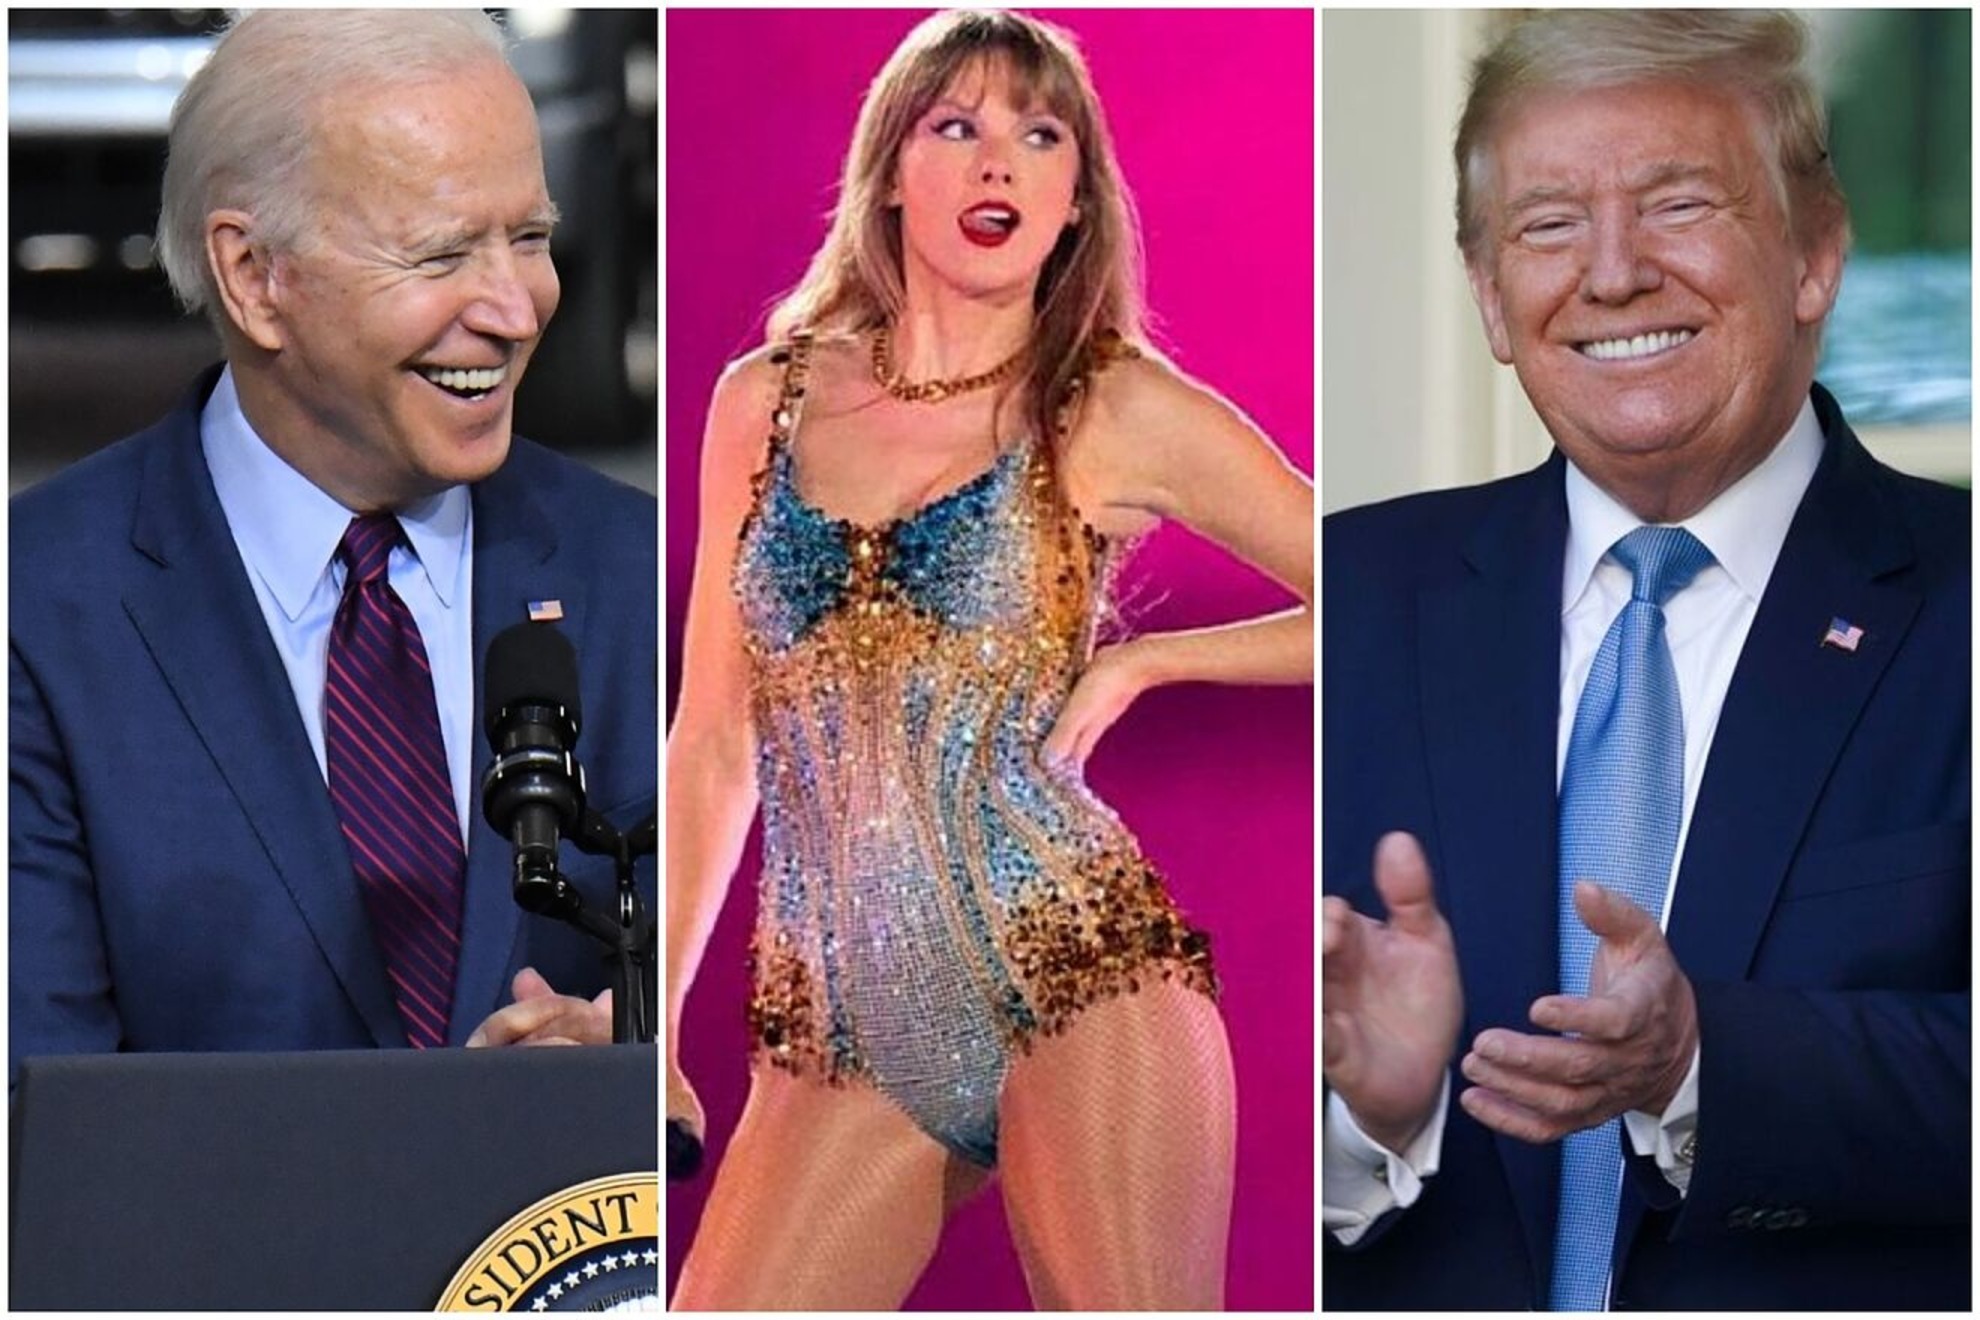 Taylor Swift could shake up the next U.S. elections for Donald Trump and Joe Biden